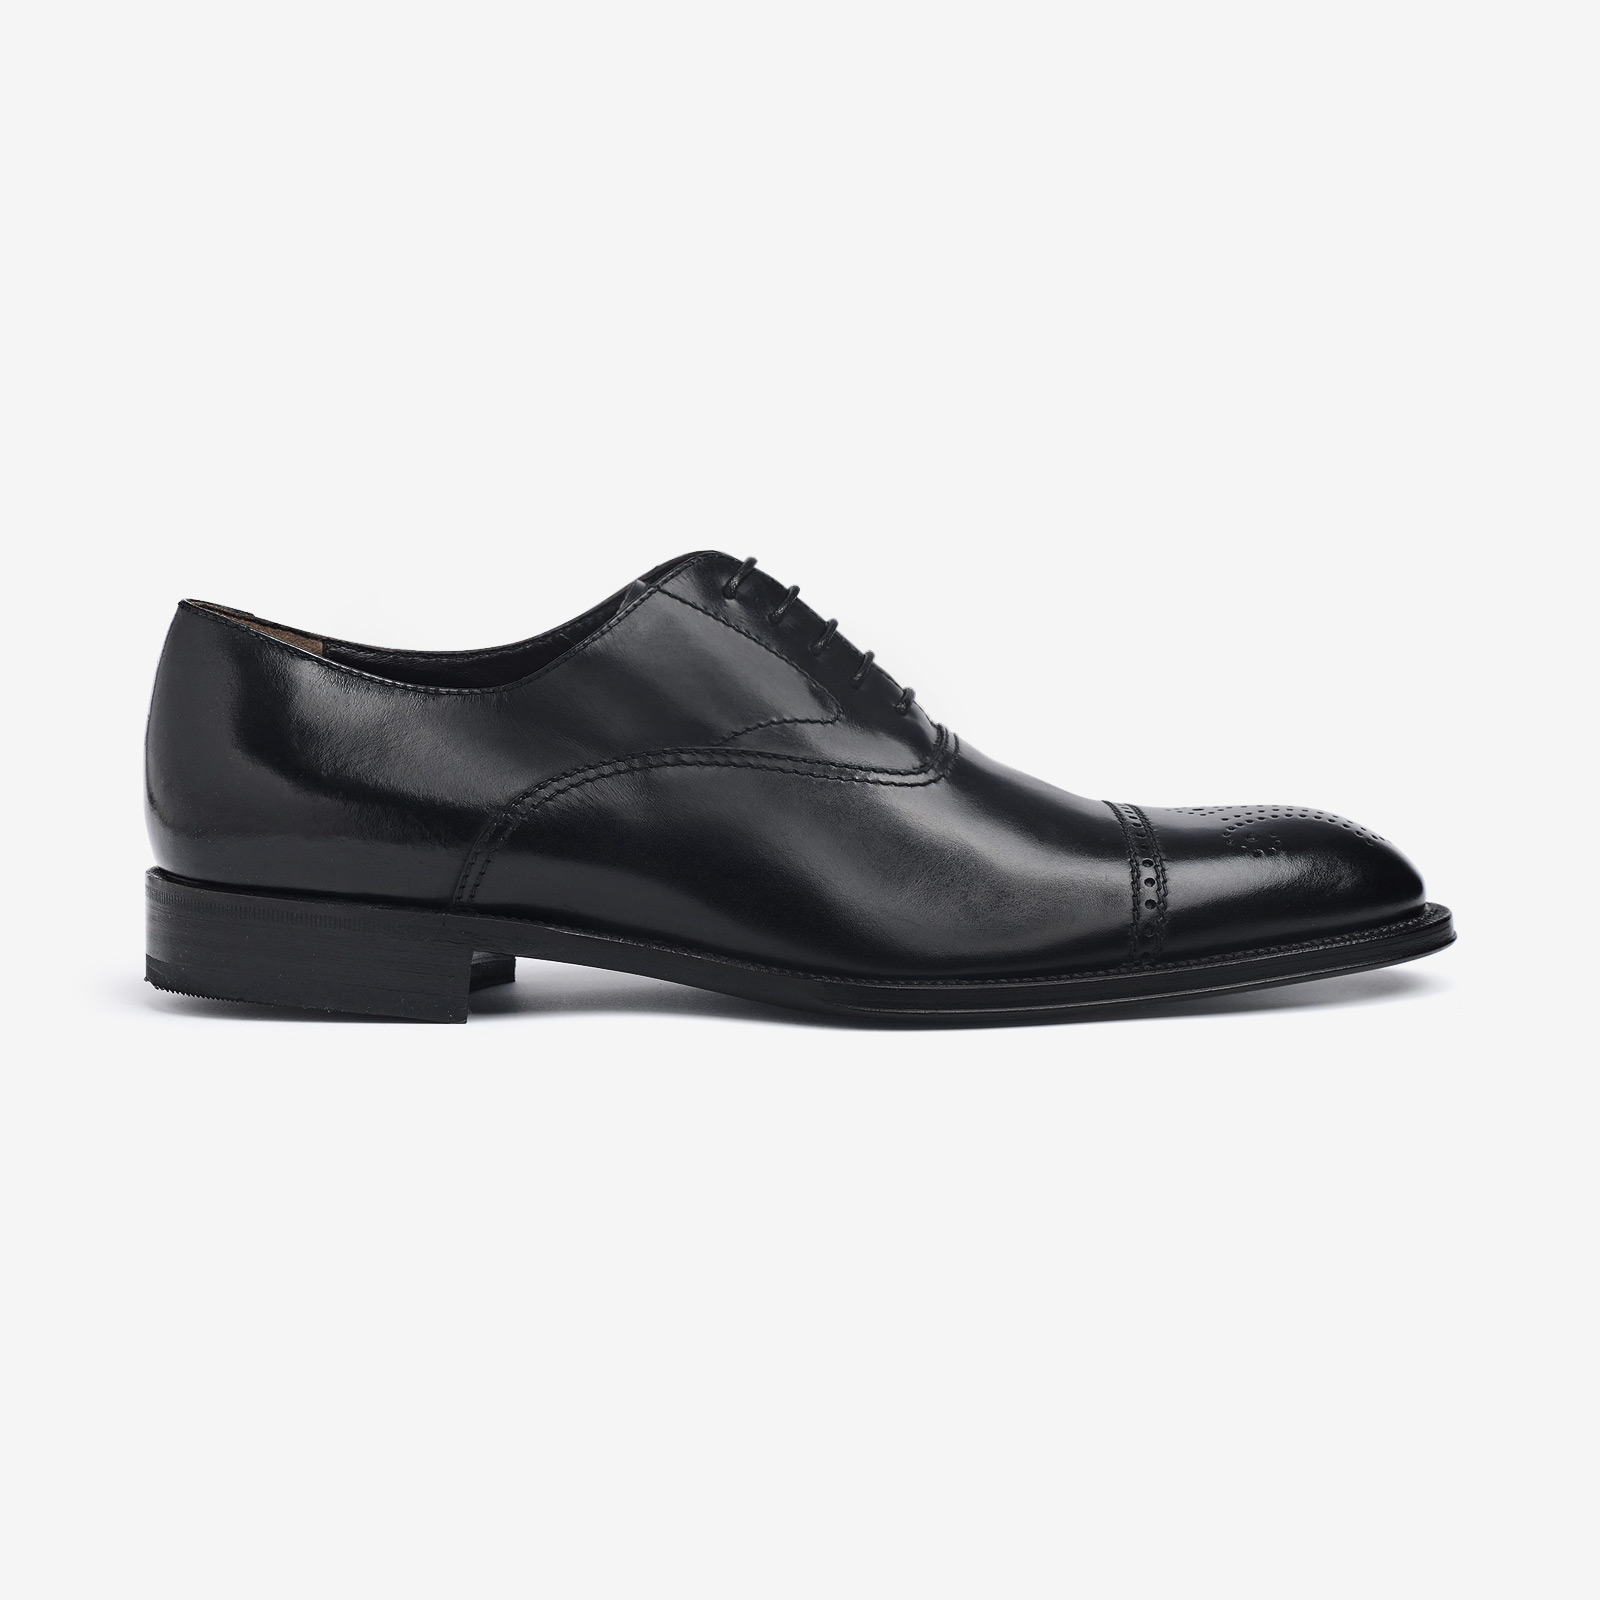 Elegant top quality italian handcrafted leather shoes | Germano Bellesi